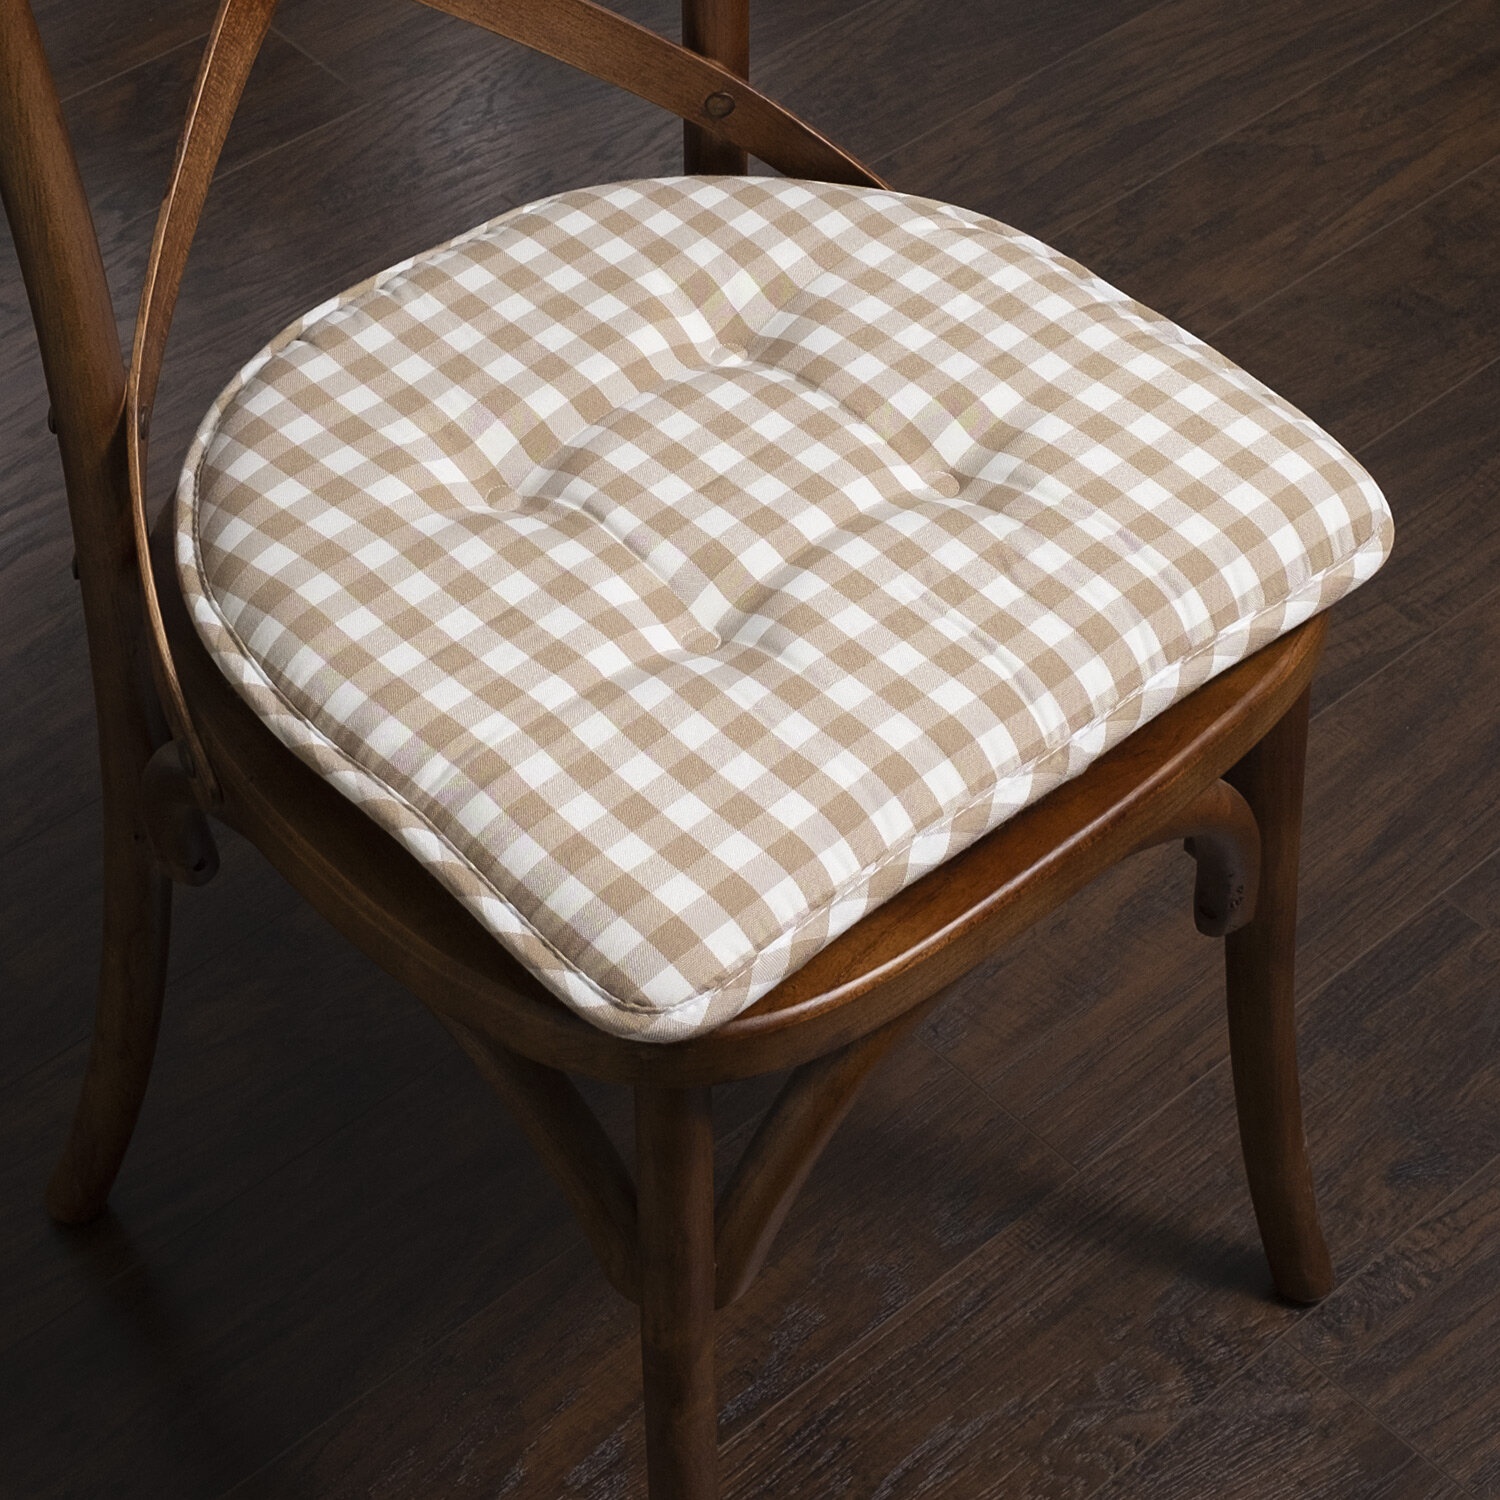 Thick Chair Seat Cushions, Soft Chair Cushions For Dining Room